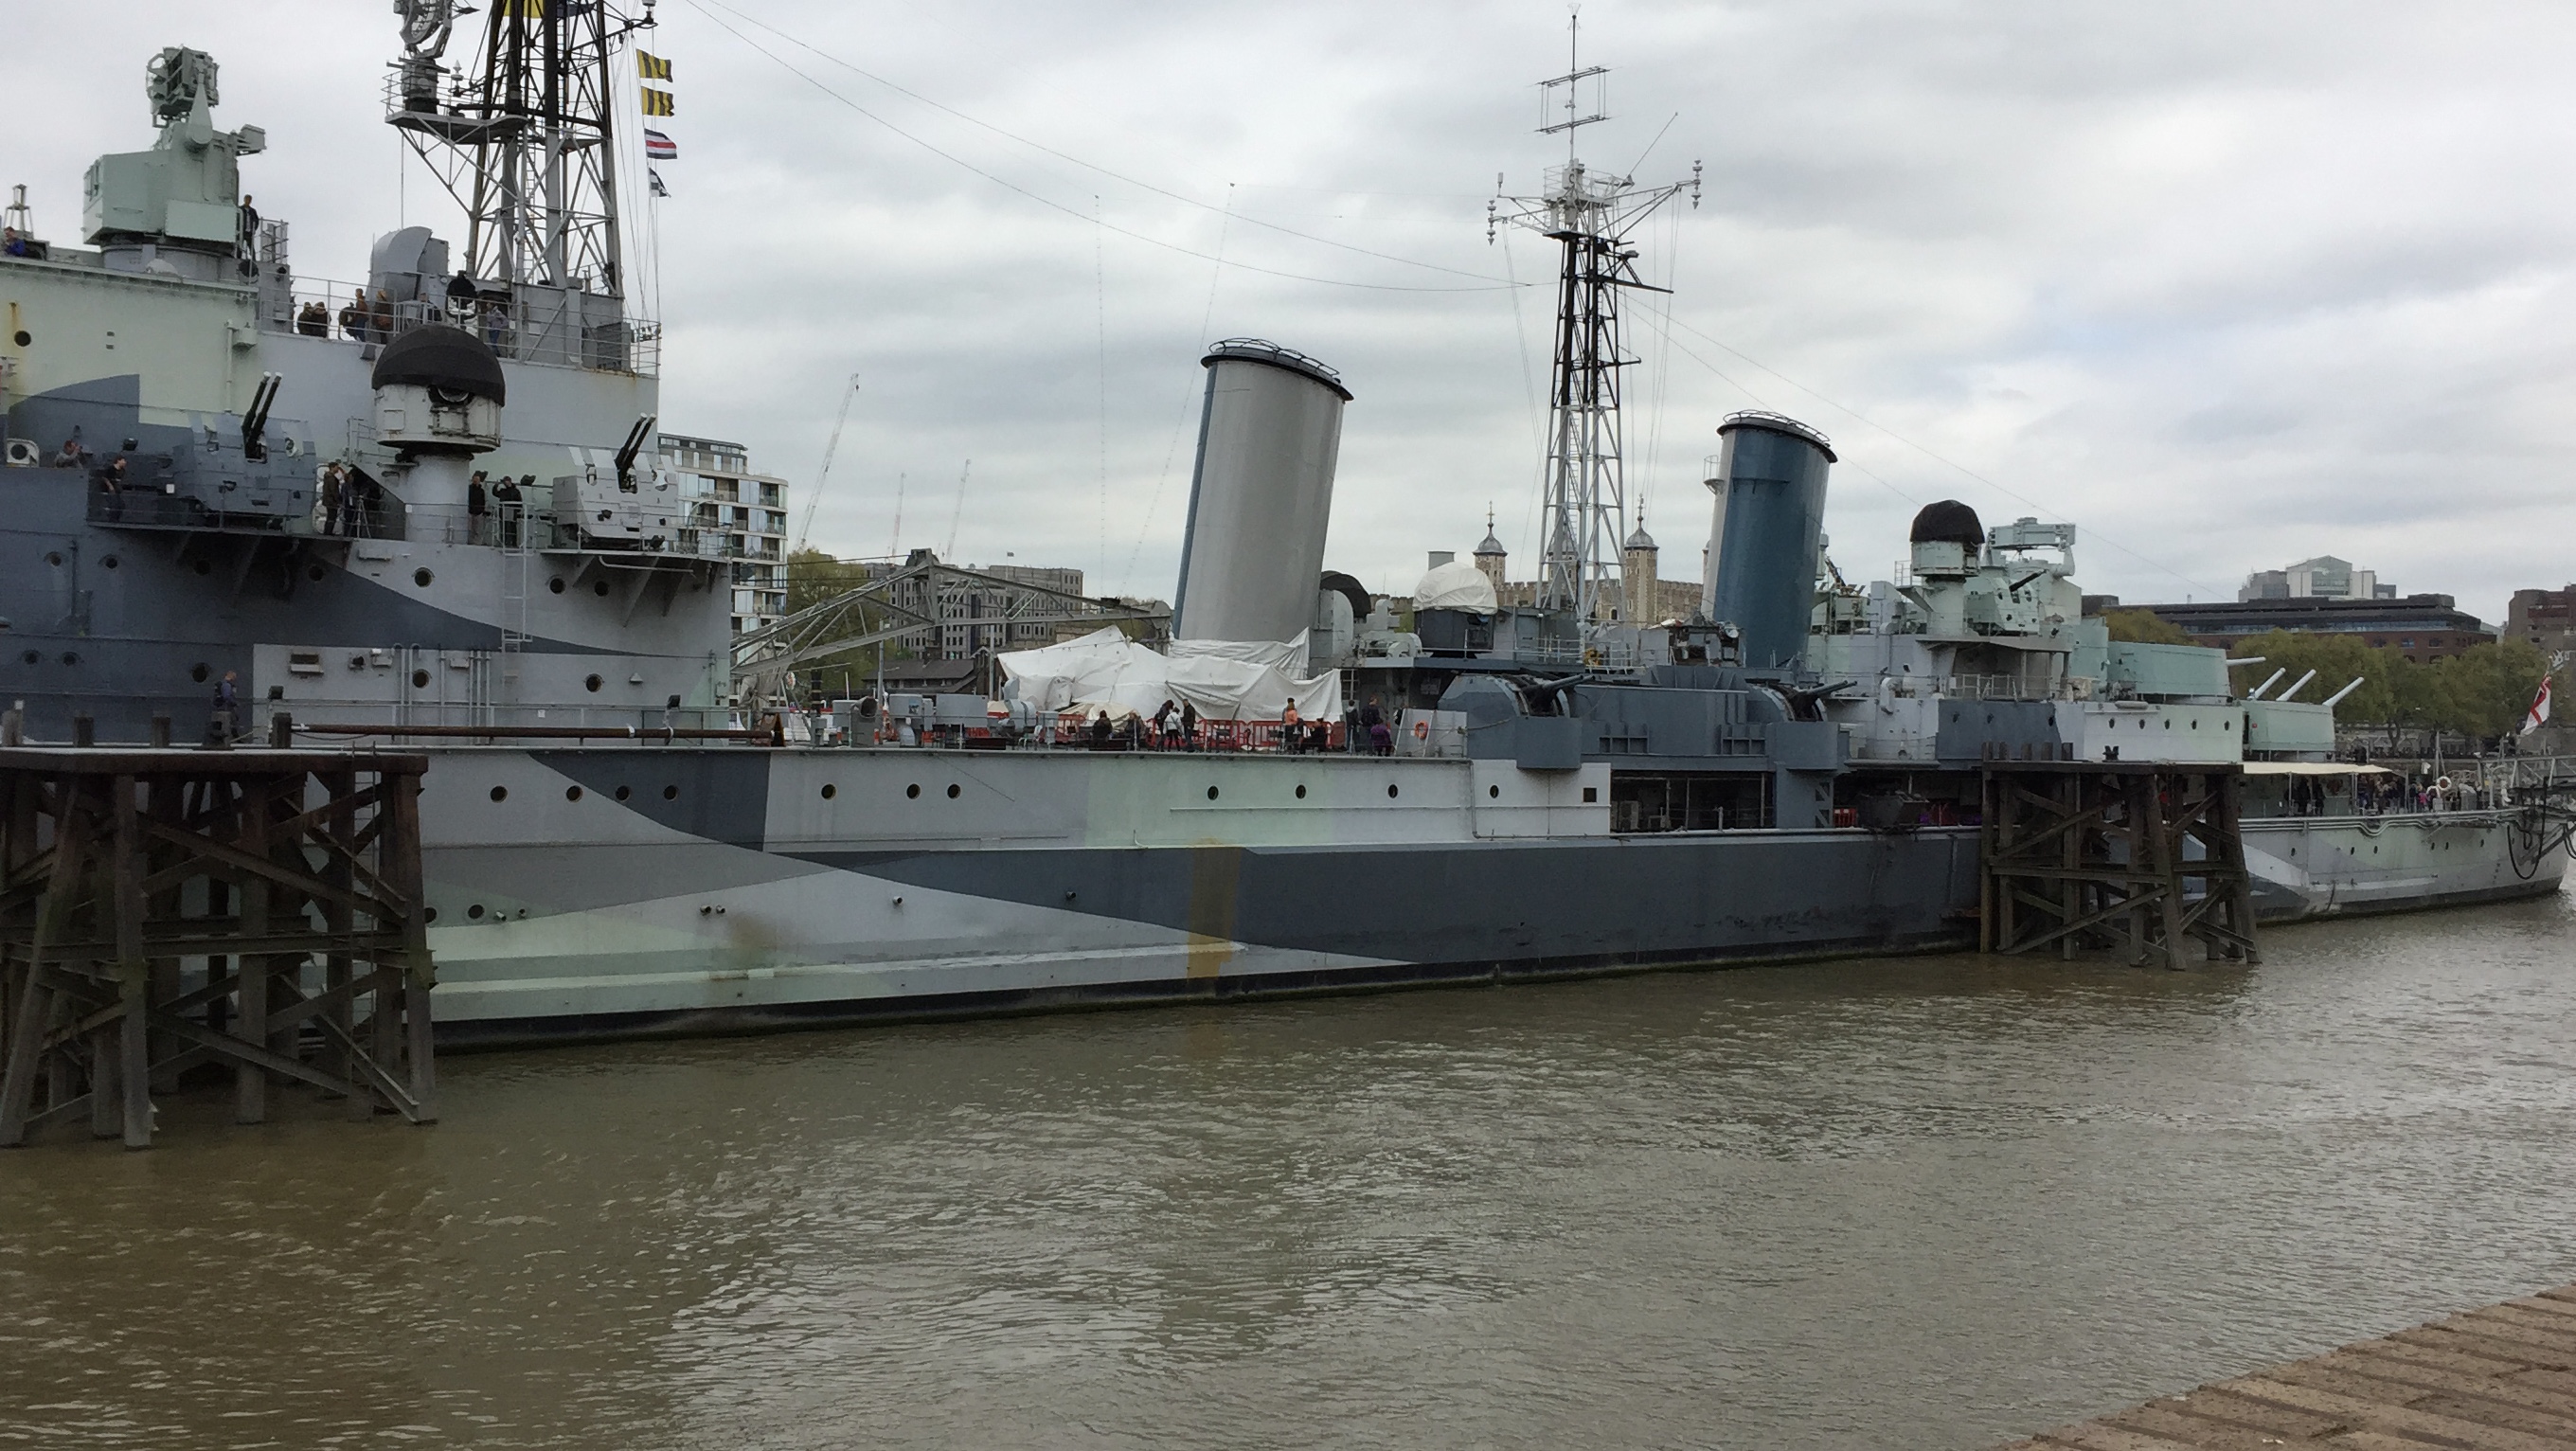 HMS Belfast, the large grey warship moored on the Thames.